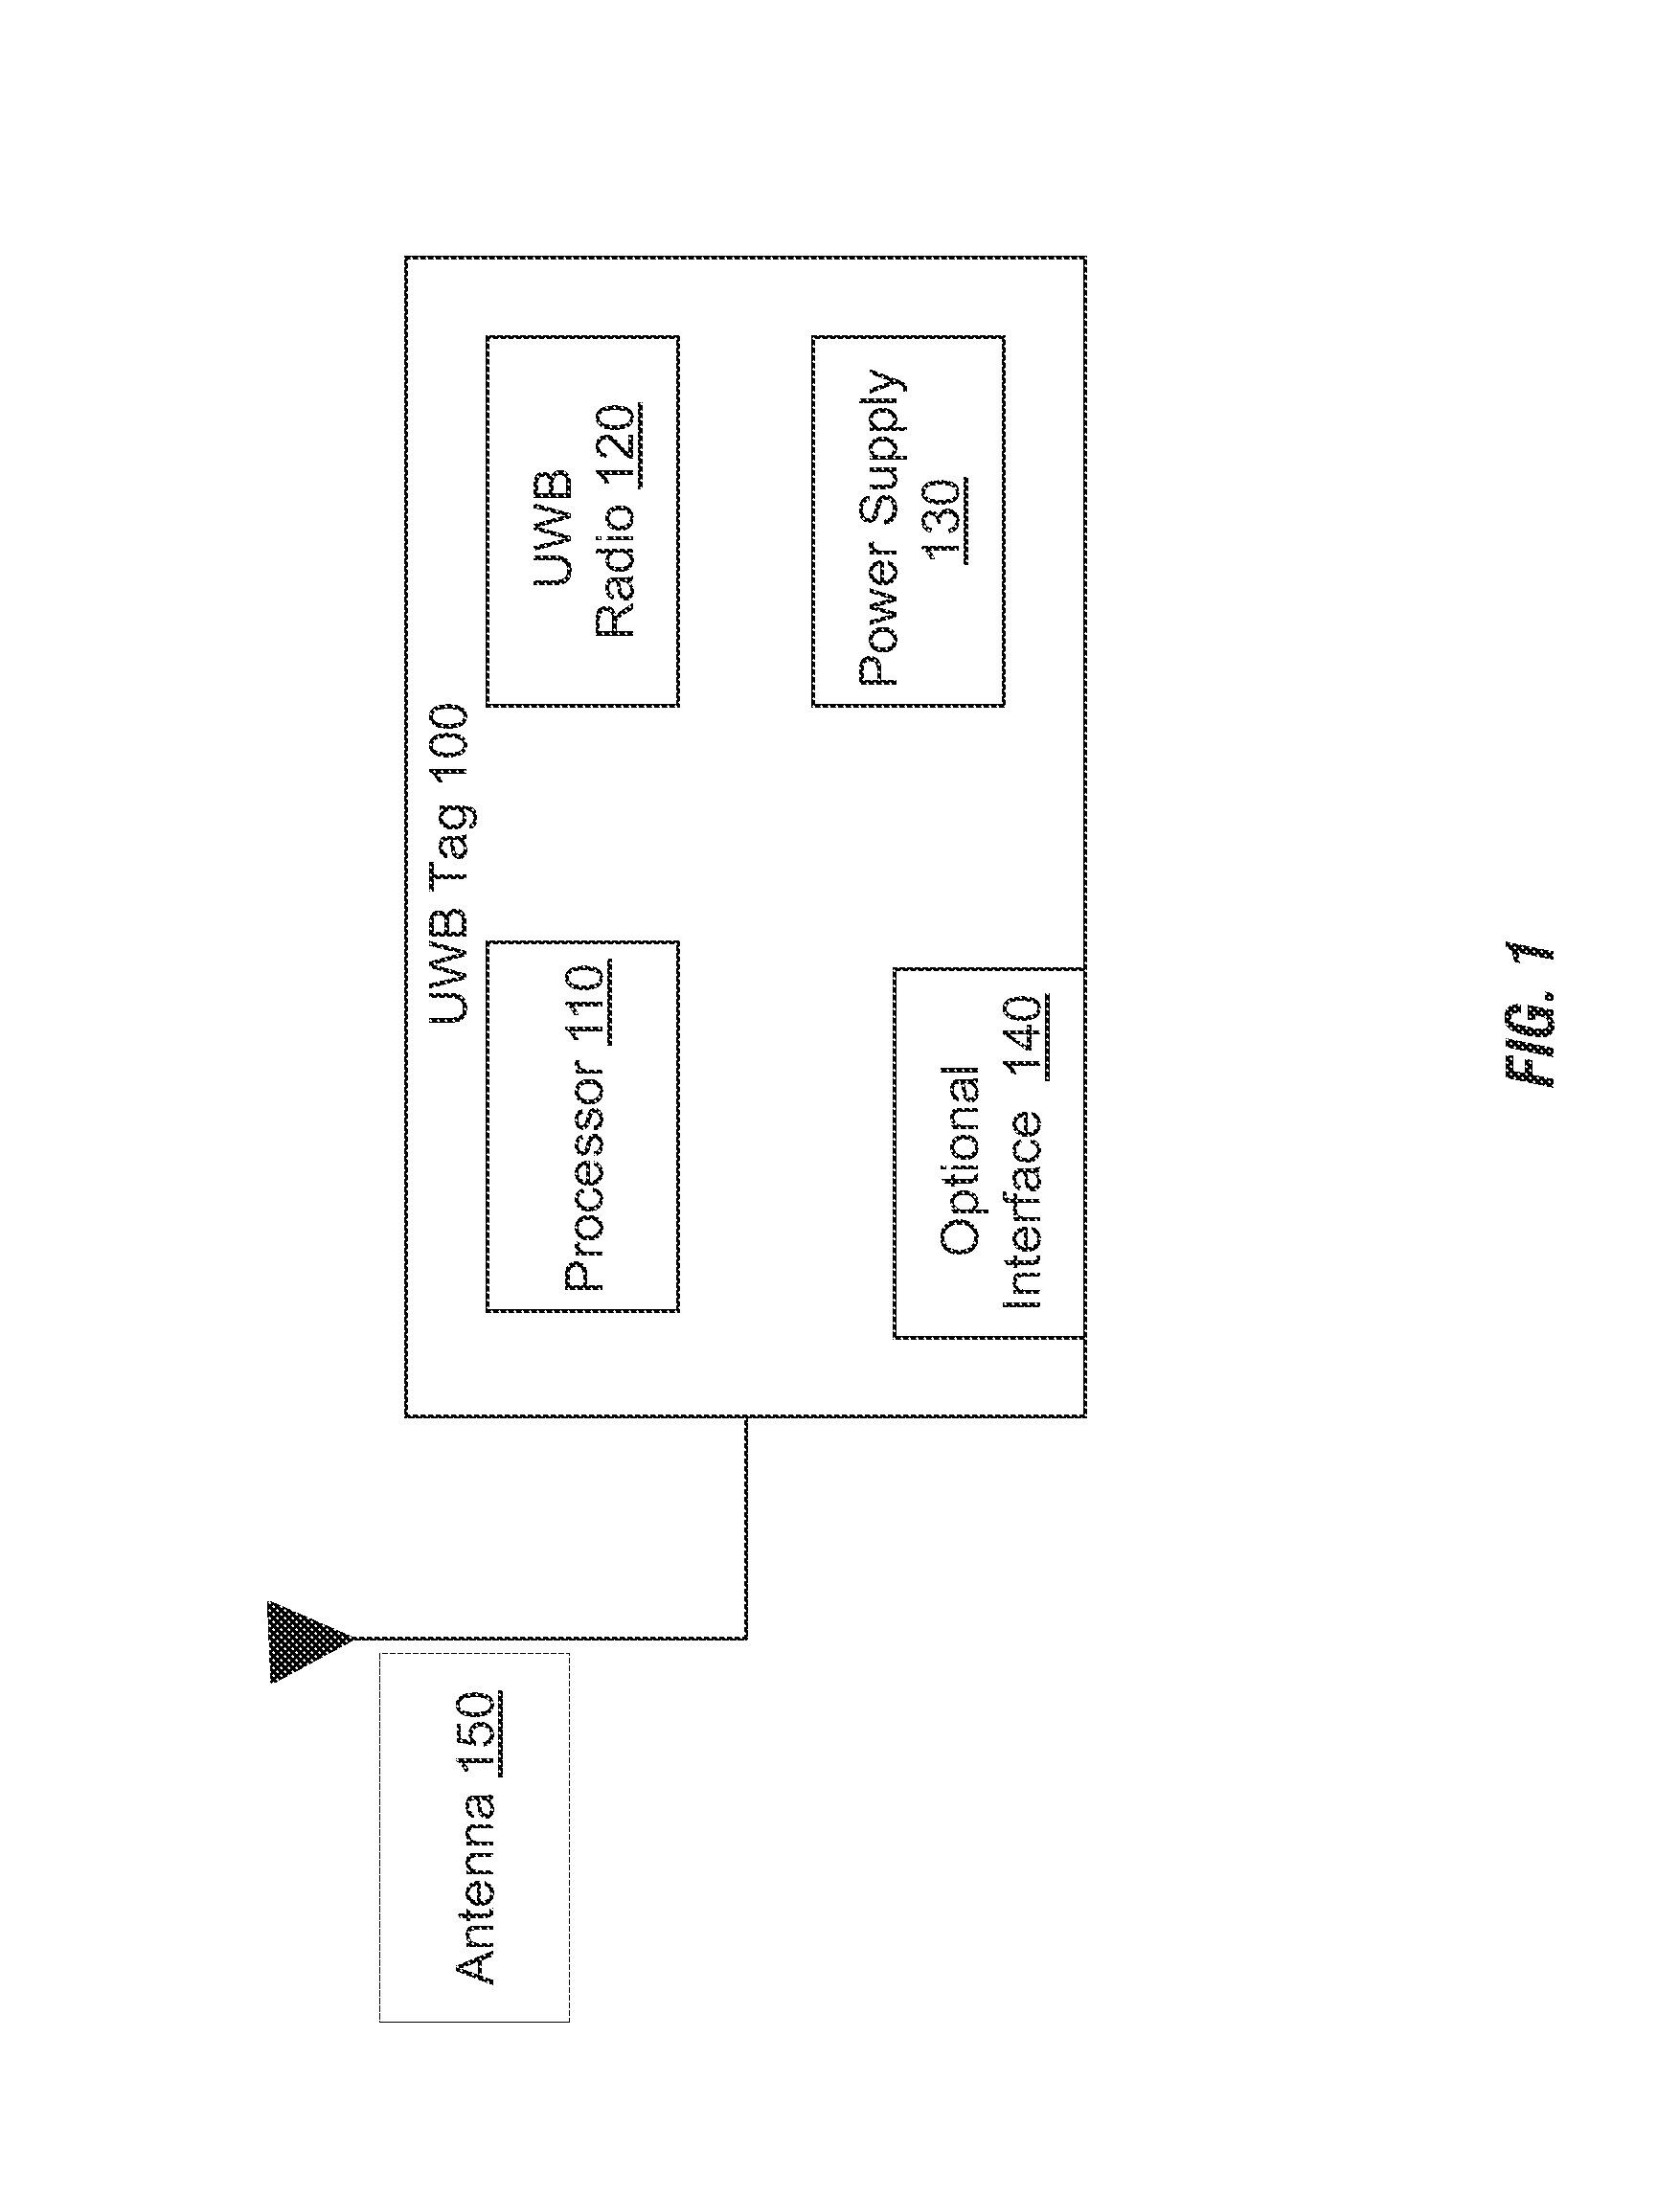 Ultra wideband radio frequency identification system, method, and apparatus